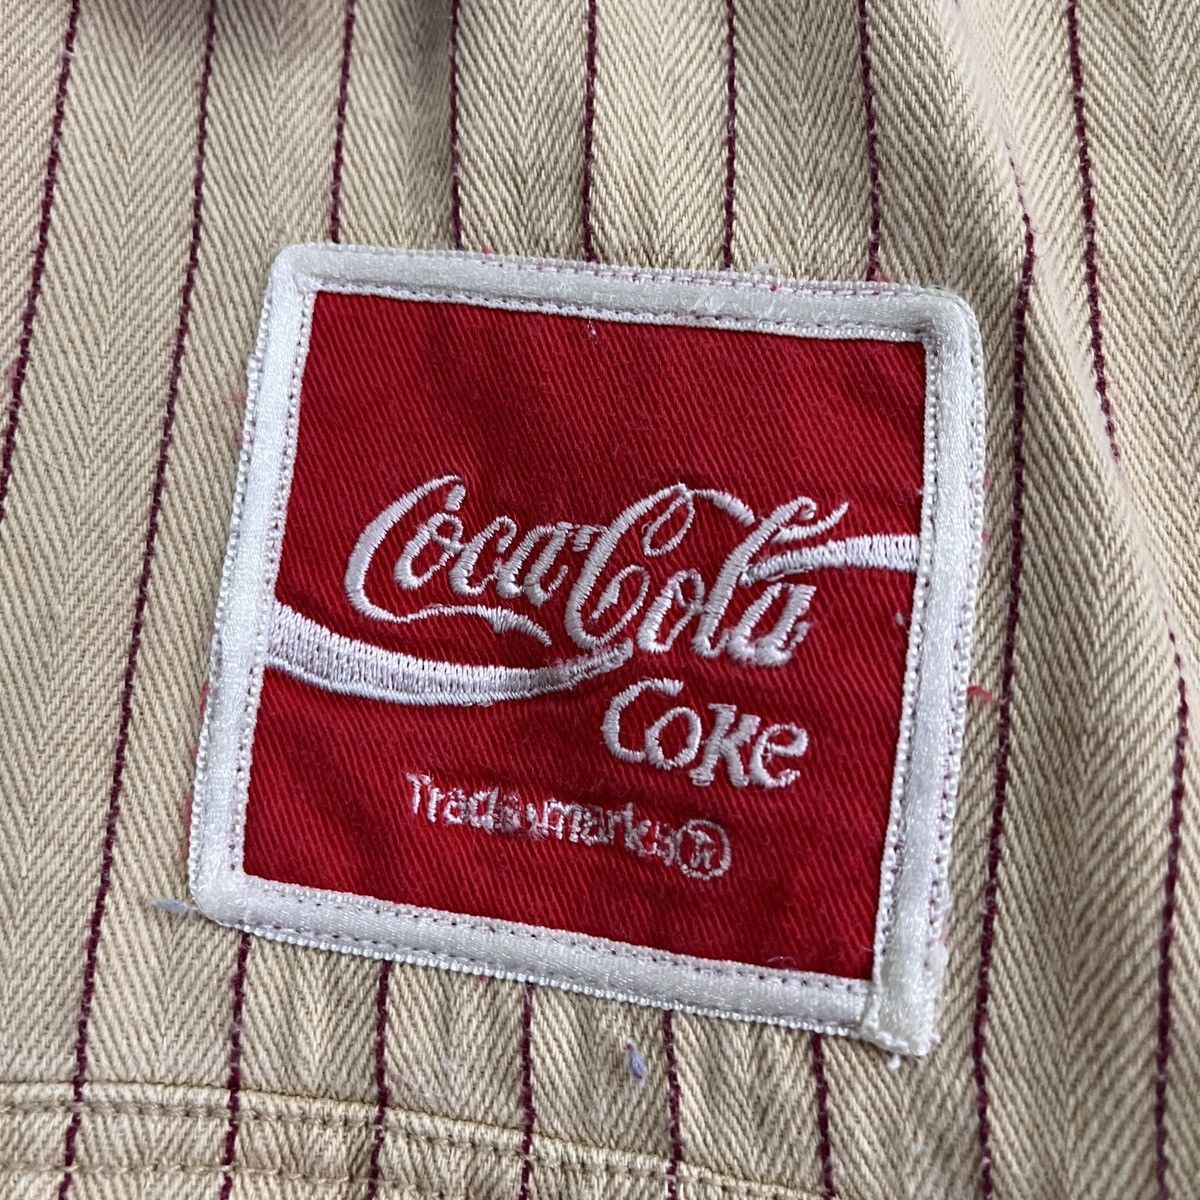 Vintage Coca Cola Hickory Buttons Up Shirt - 4